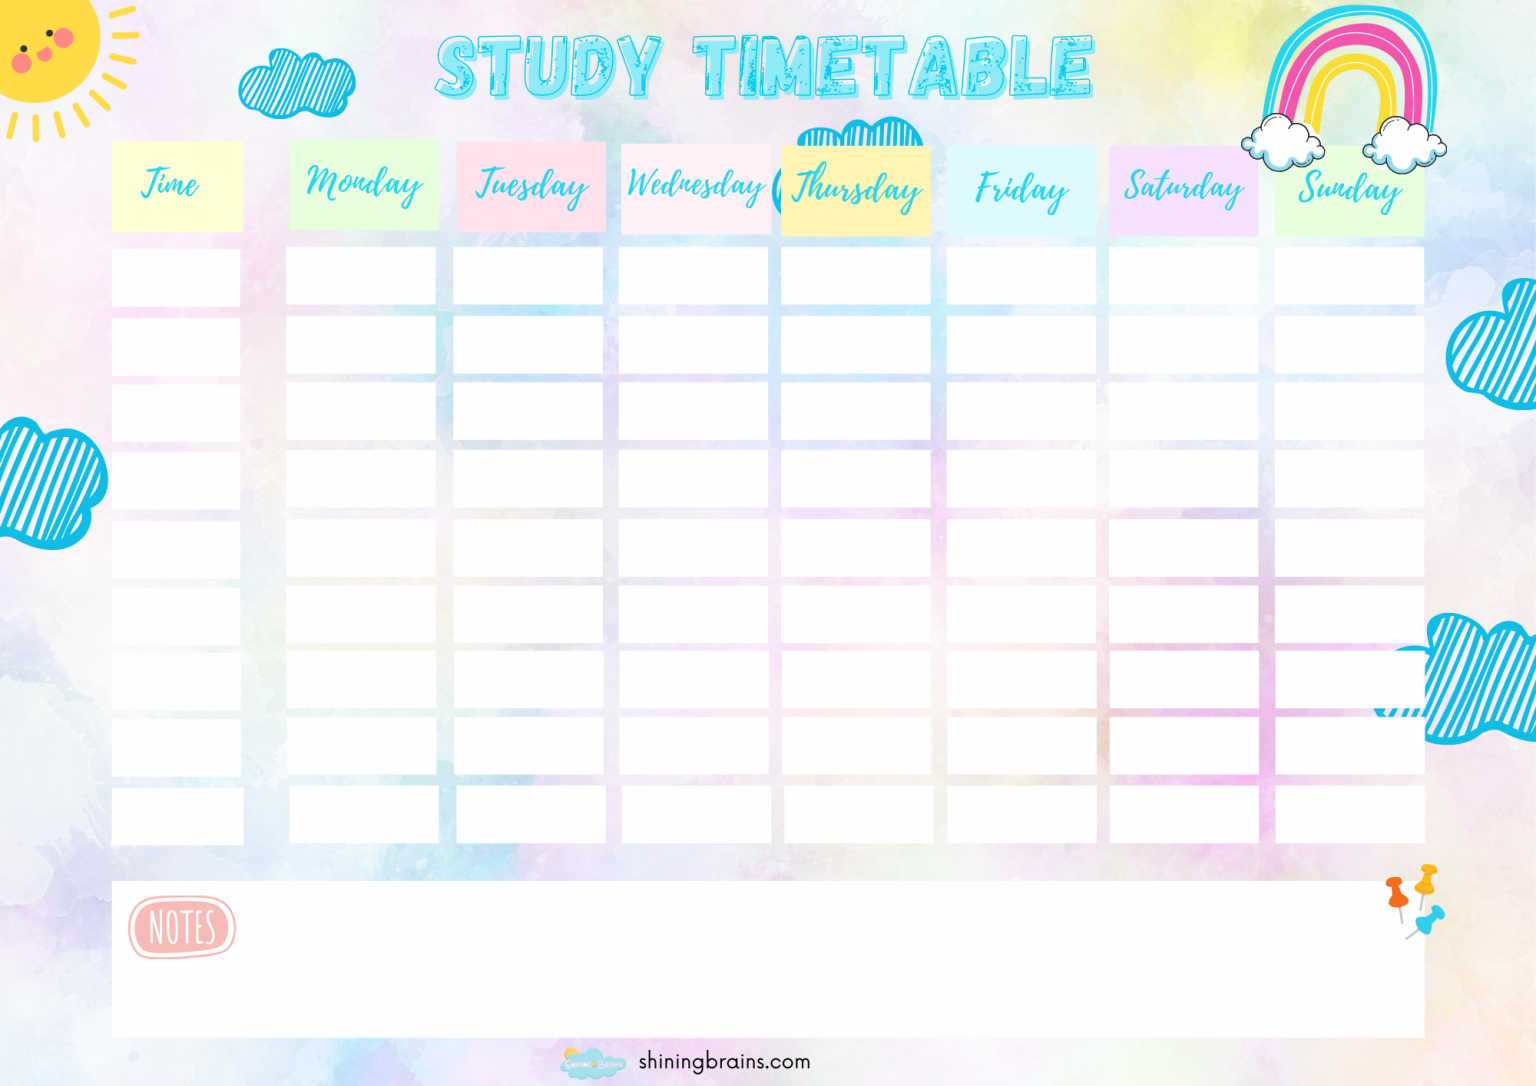 Study Timetable Template for Students Free Printable Shining Brains